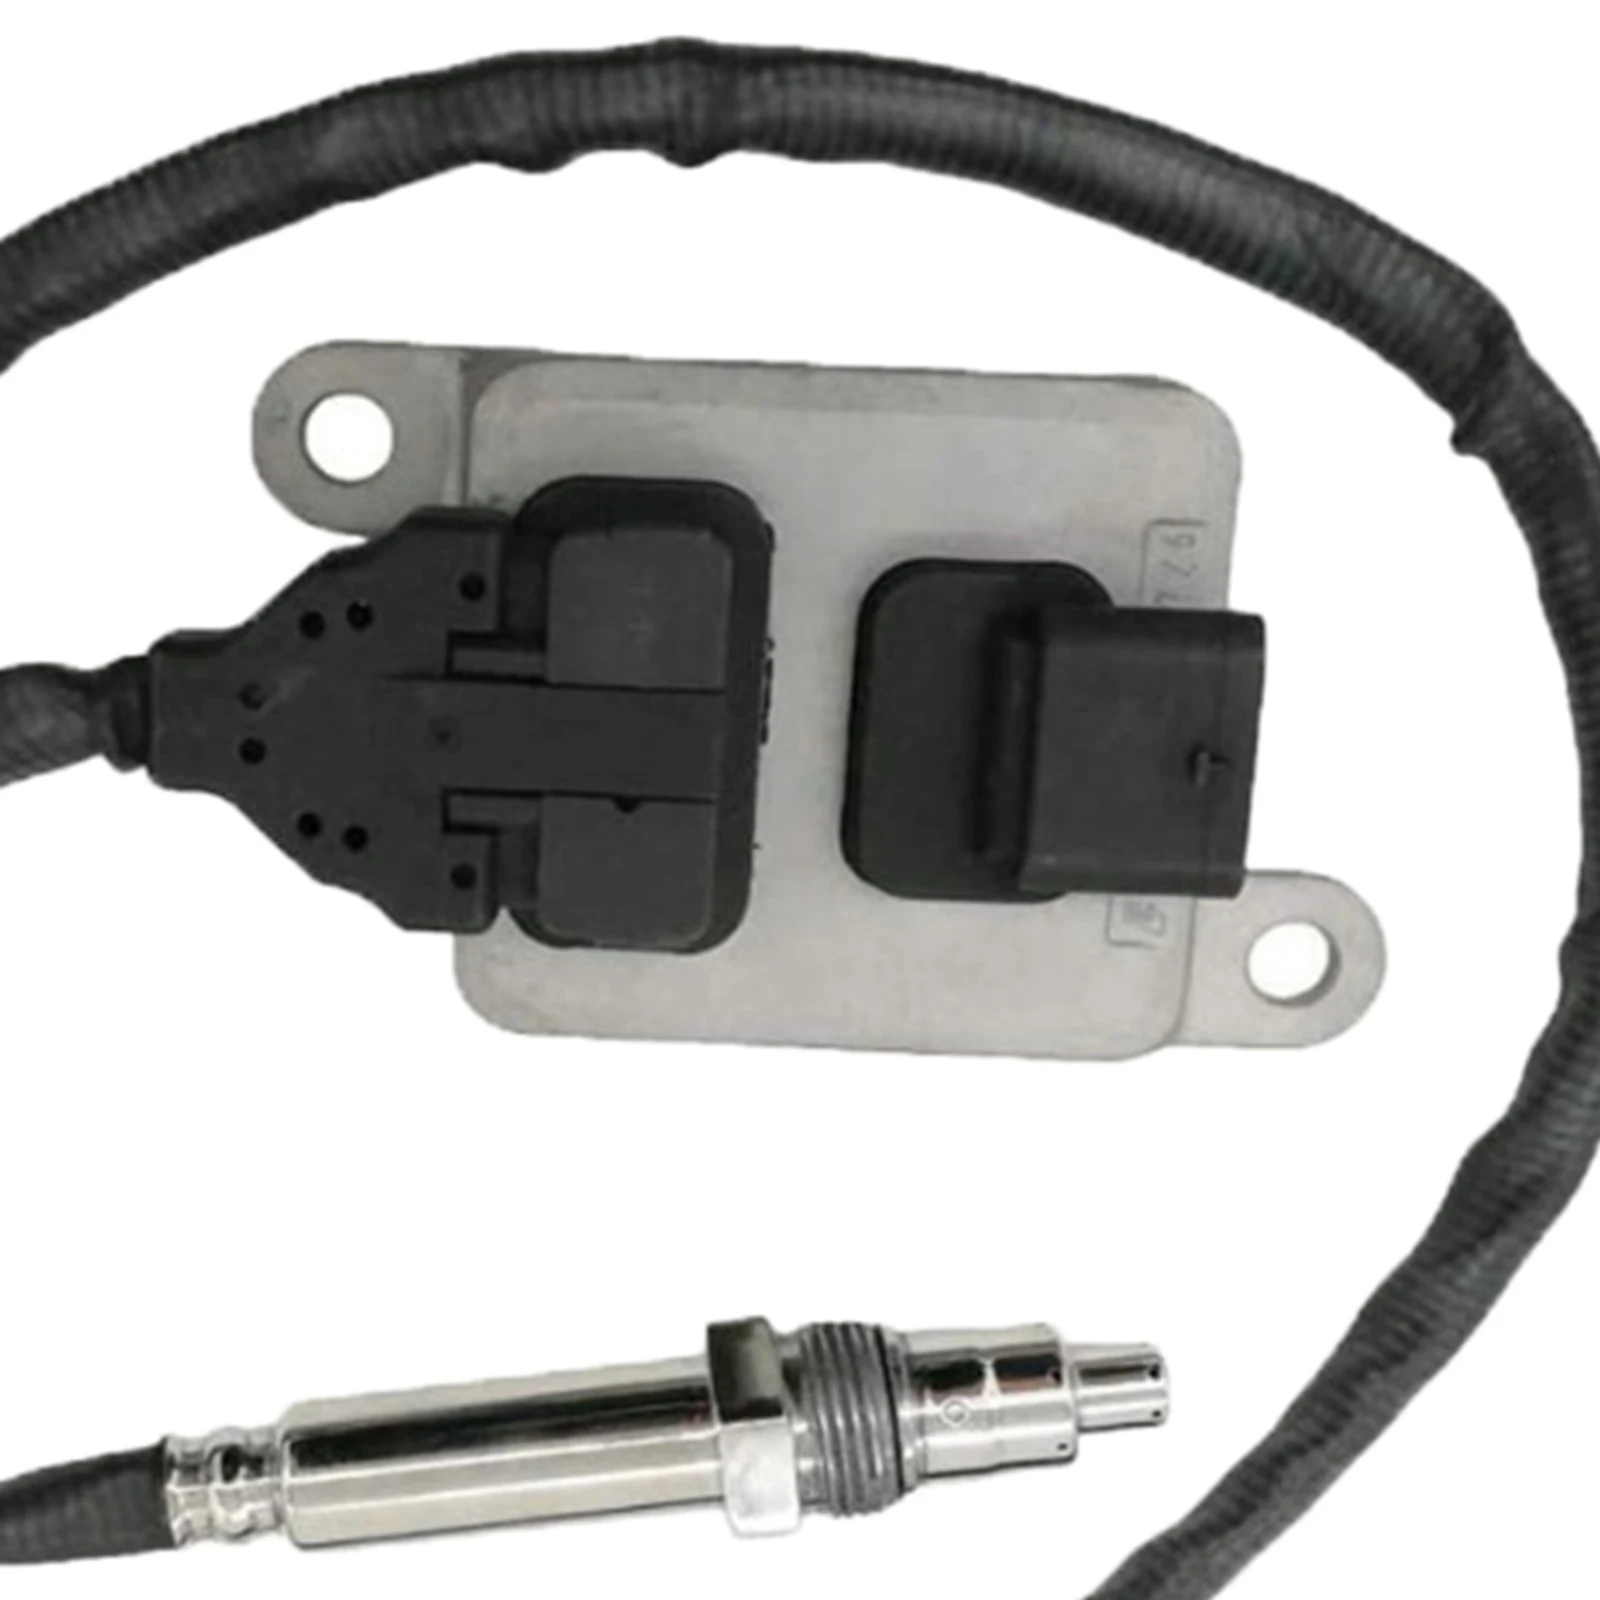 NOX Sensor Compatible with GL320 GL350 E250 ML320 ML350 Replacement Replace A-000-905-35-03 5WK9-6682D